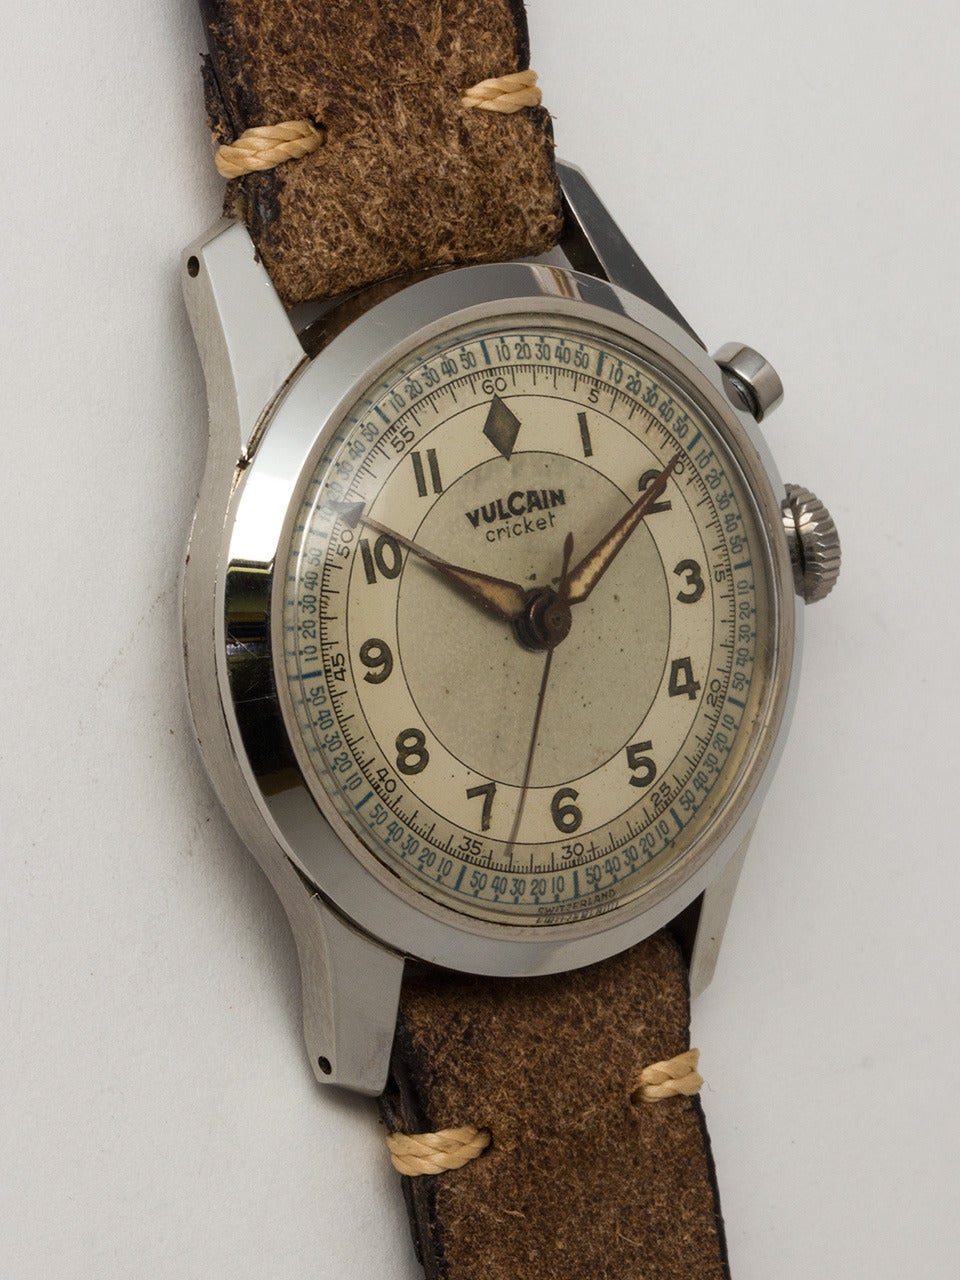 Vulcain Cricket Stainless Steel Alarm Wristwatch circa 1950's. 34 X 42mm case with prominent lugs and heavy snap on back with slots for transmitting sound of alarm. Very pleasing original matte silver 2 tone dial with luminous indexes and tapered